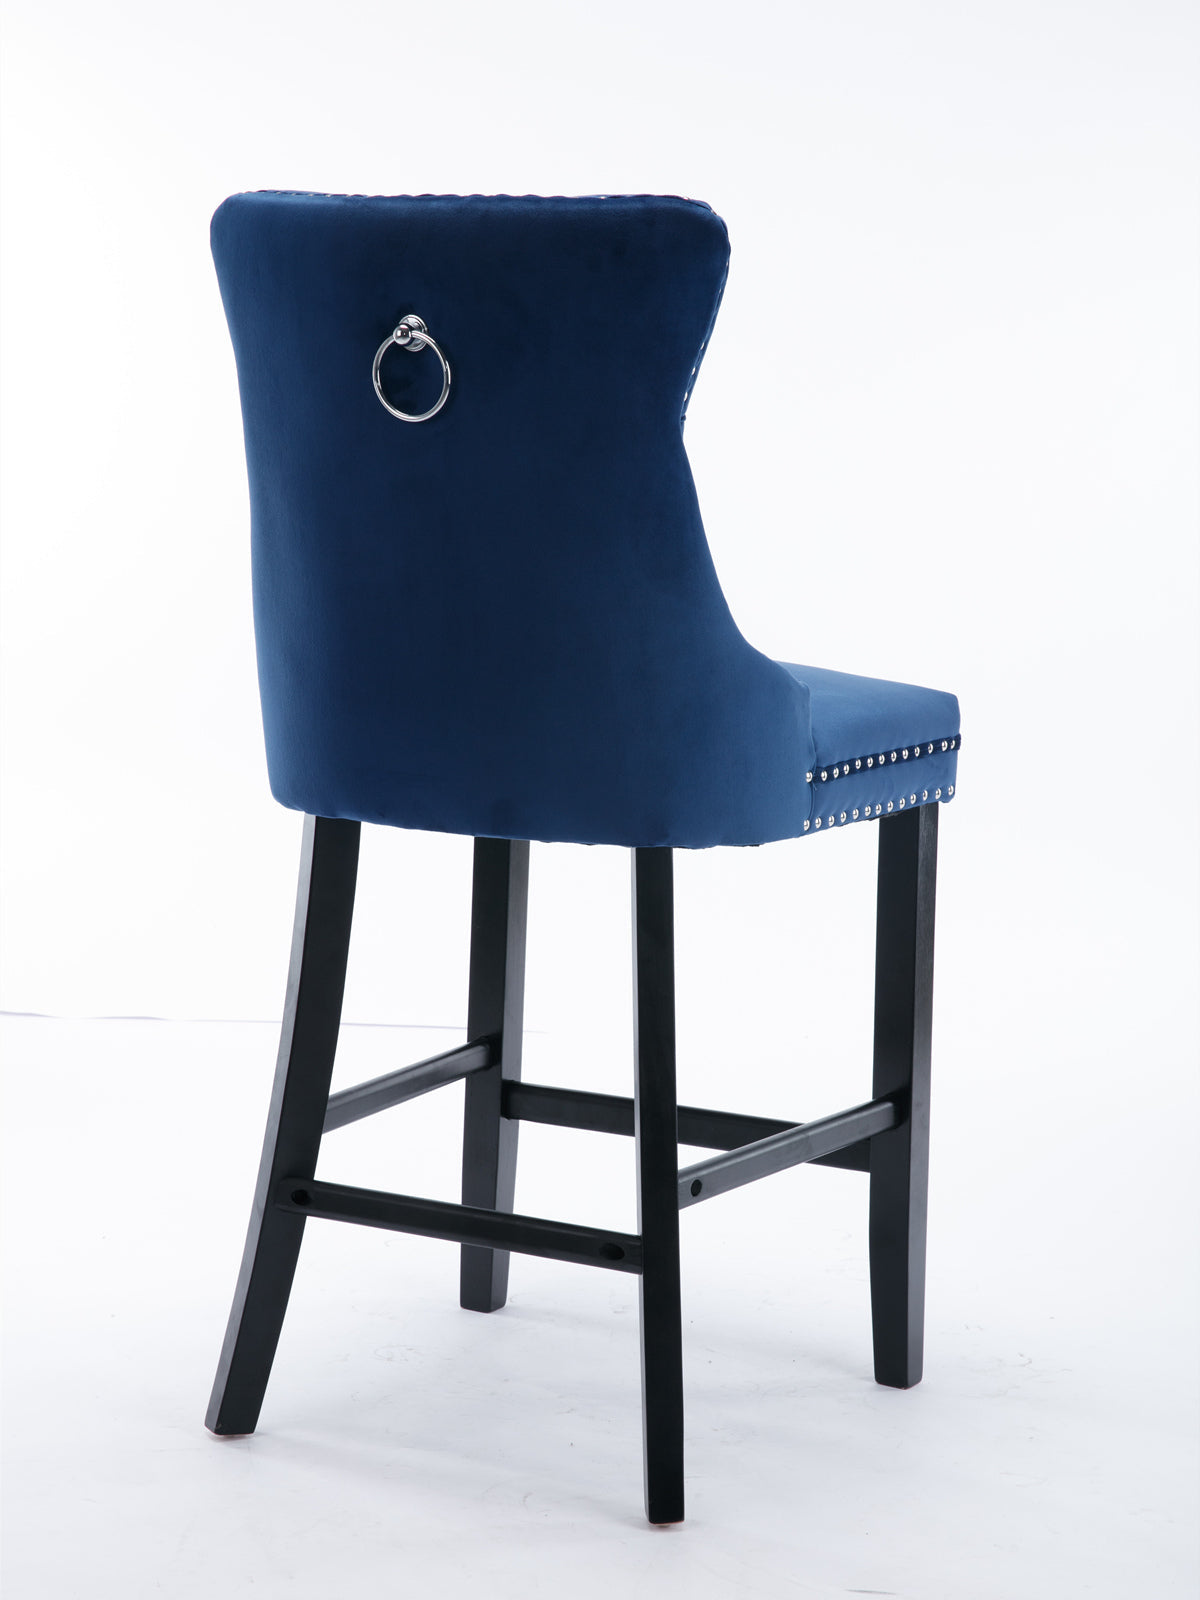 2X Velvet Bar Stools with Studs Trim Wooden Legs Tufted Dining Chairs Kitchen - image5